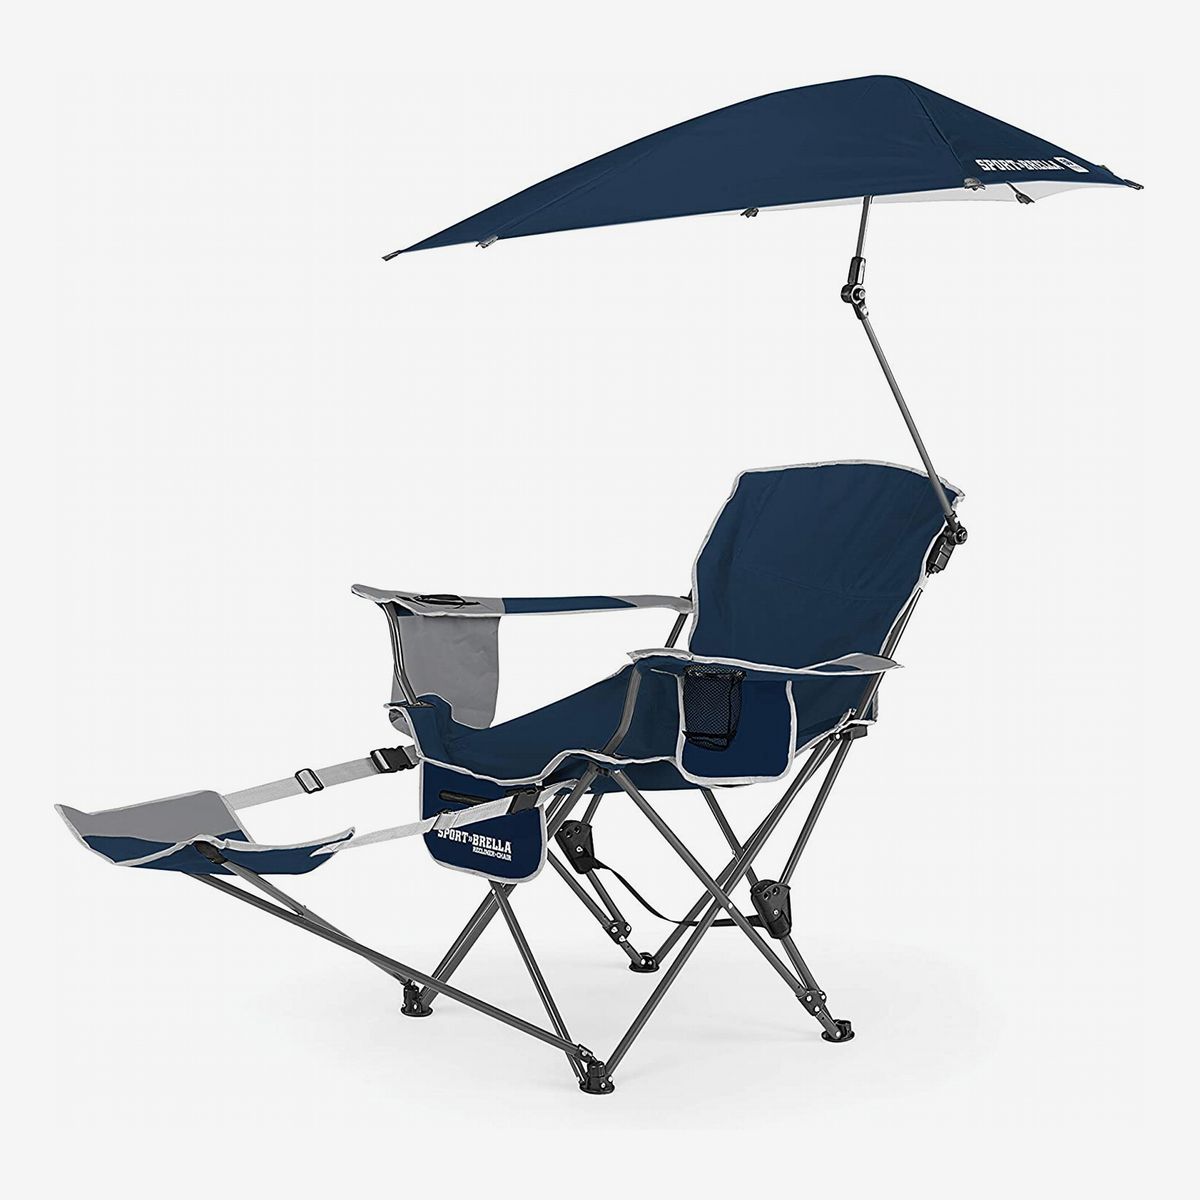 double folding chair with umbrella